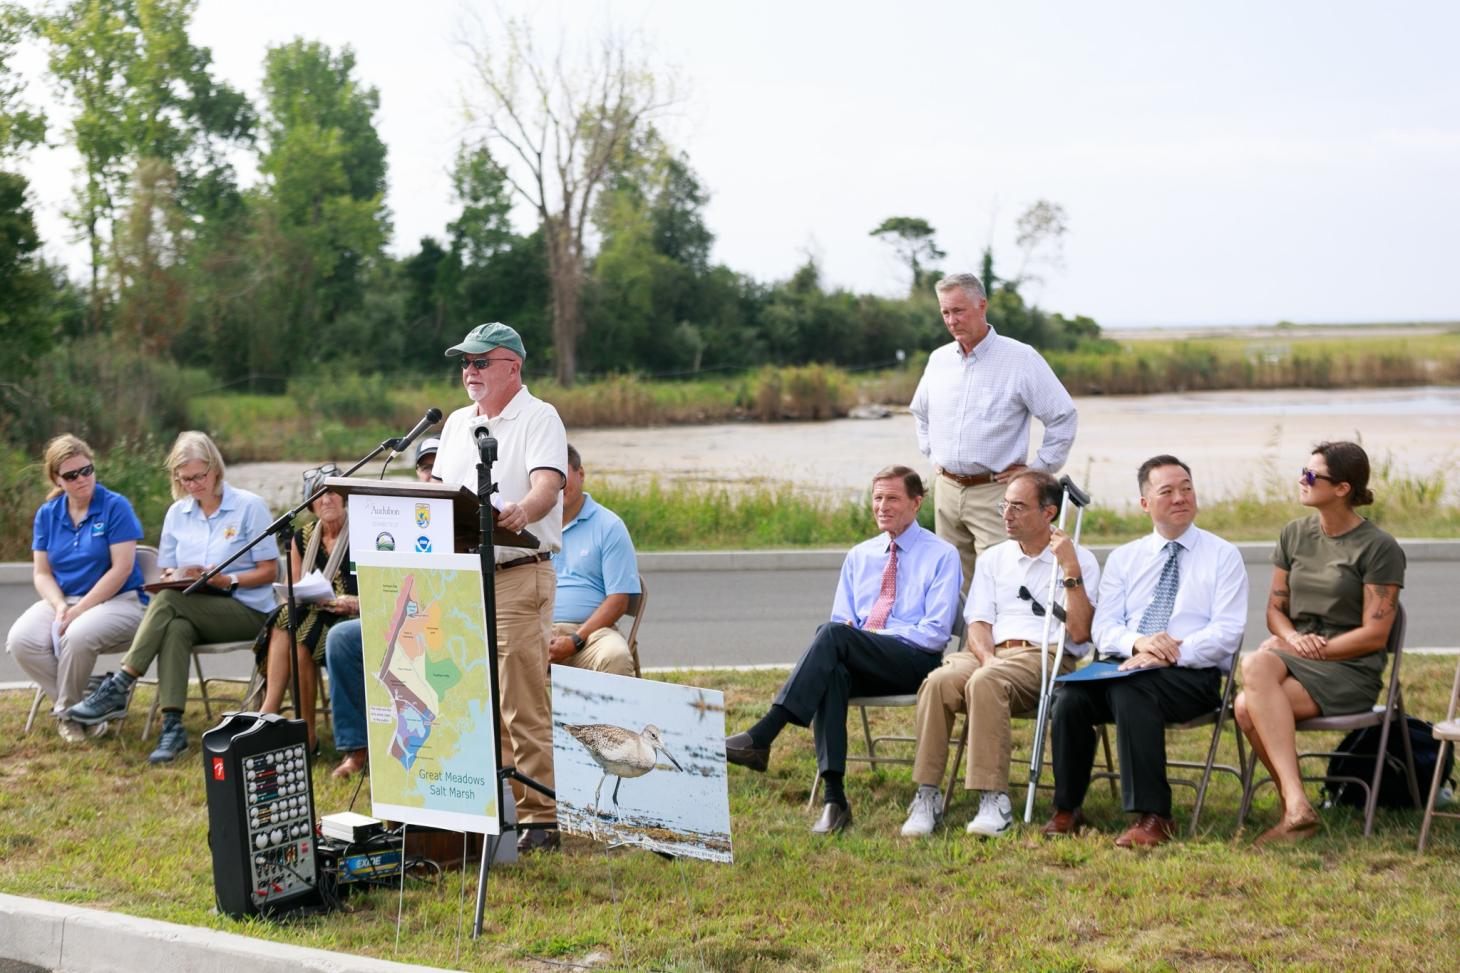 State Rep. Gresko joined by Stratford High School students, federal and local officials to celebrate the restoration of the Great Meadows Marsh.